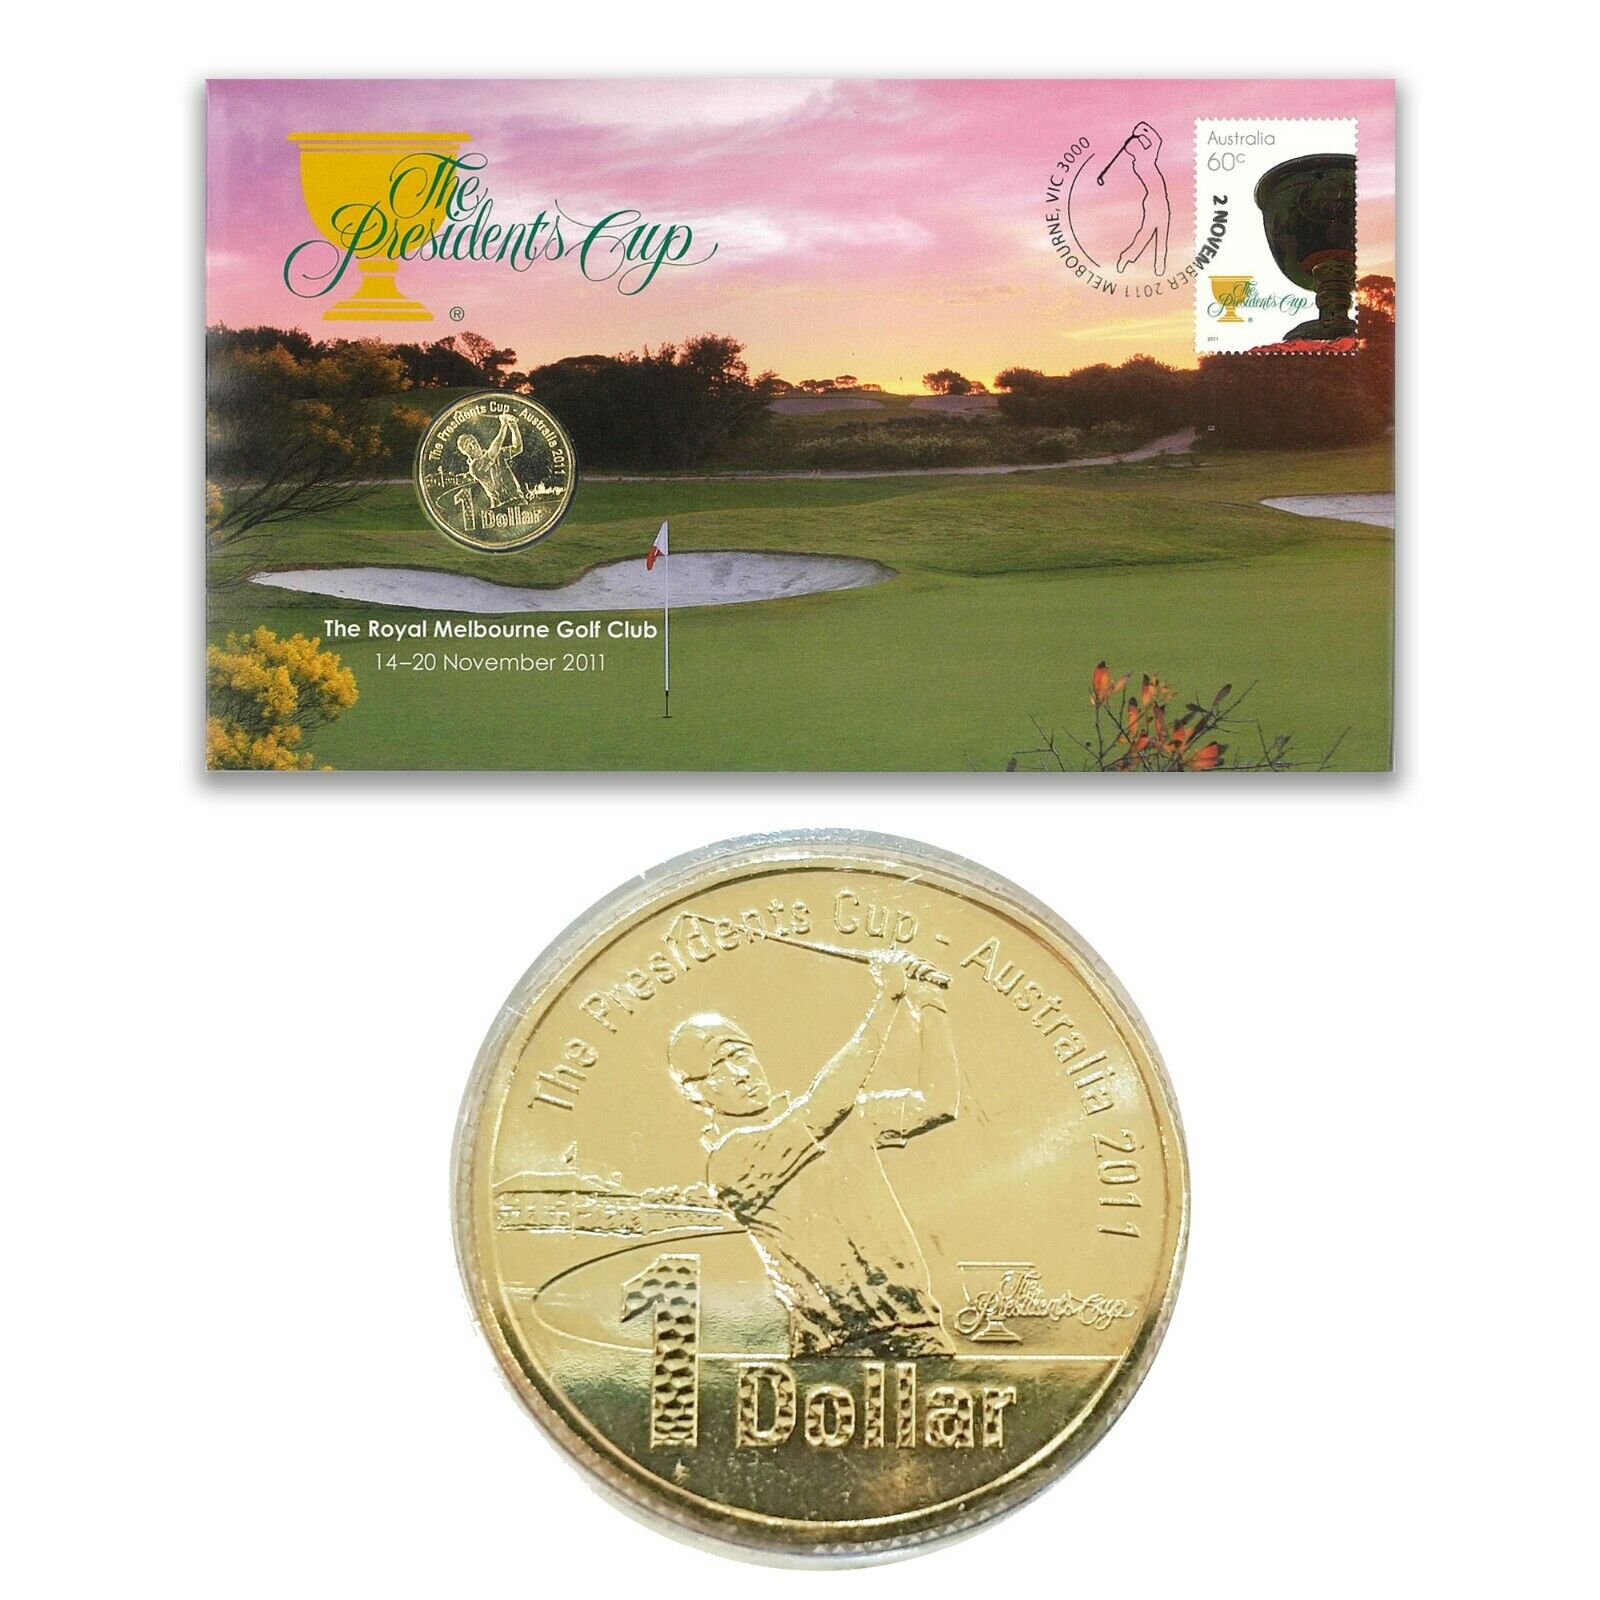 Australia 2011 Golf Presidents Cup Stamp & $1 UNC Coin Cover - PNC